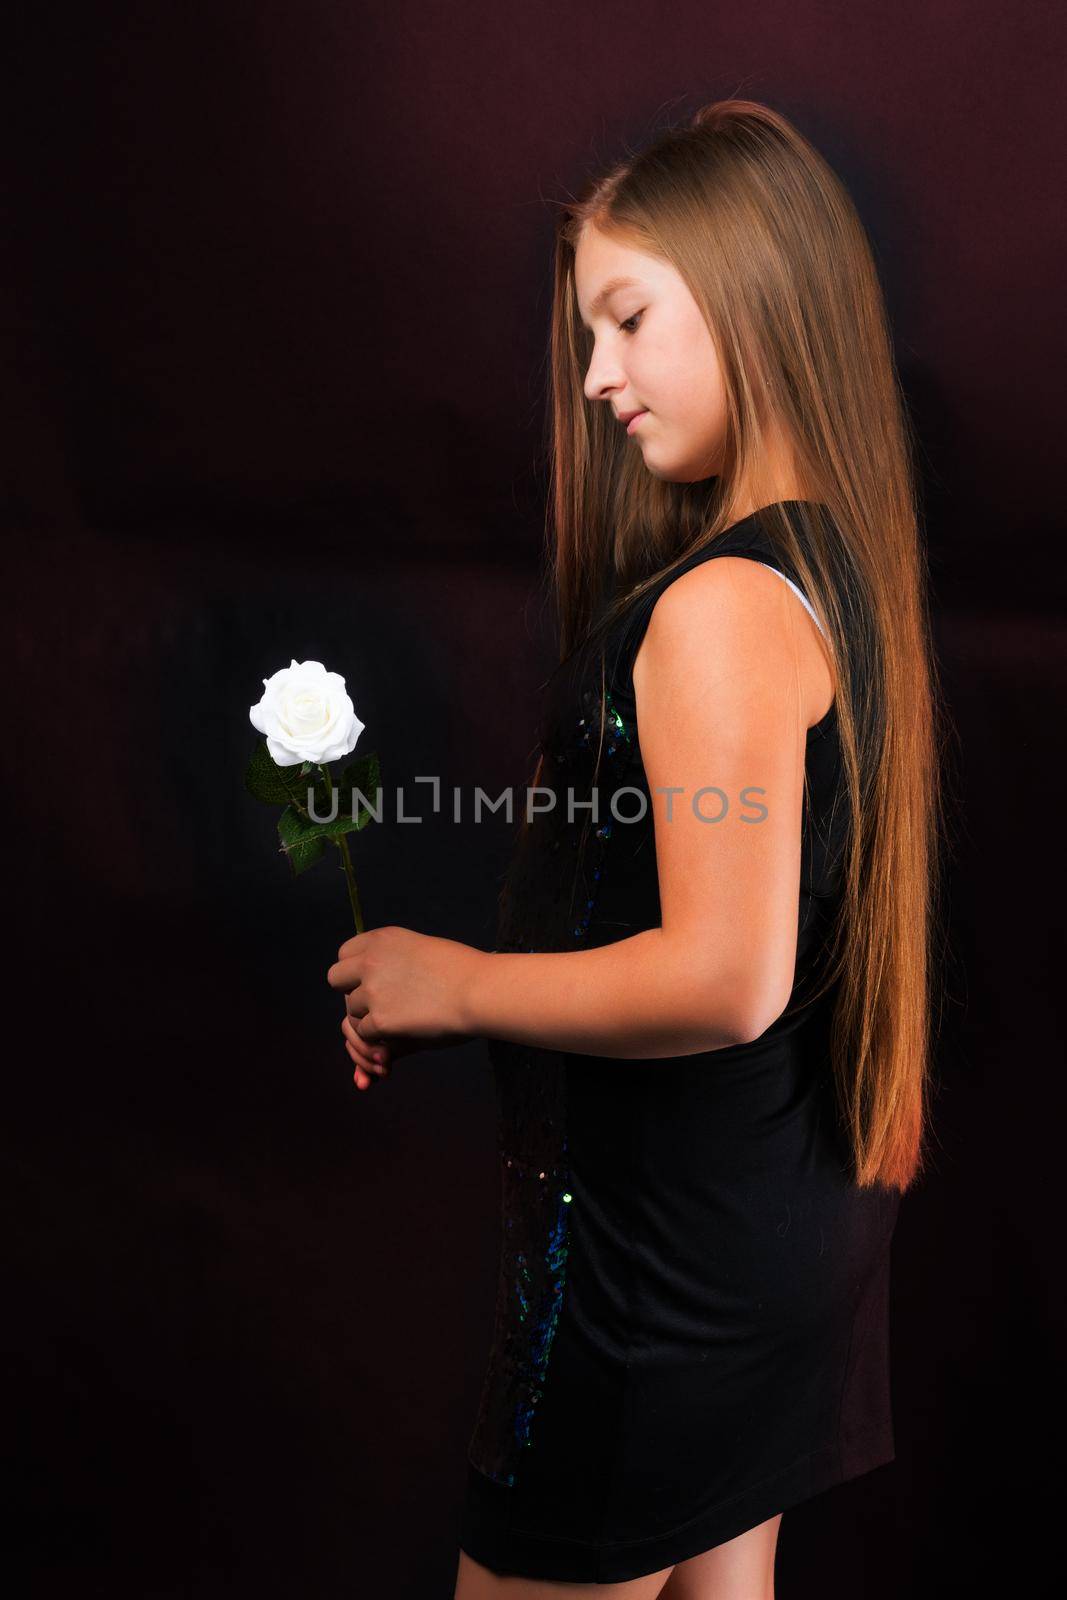 A teenage girl with a flower in her hand. Shooting in the studio on a black background.